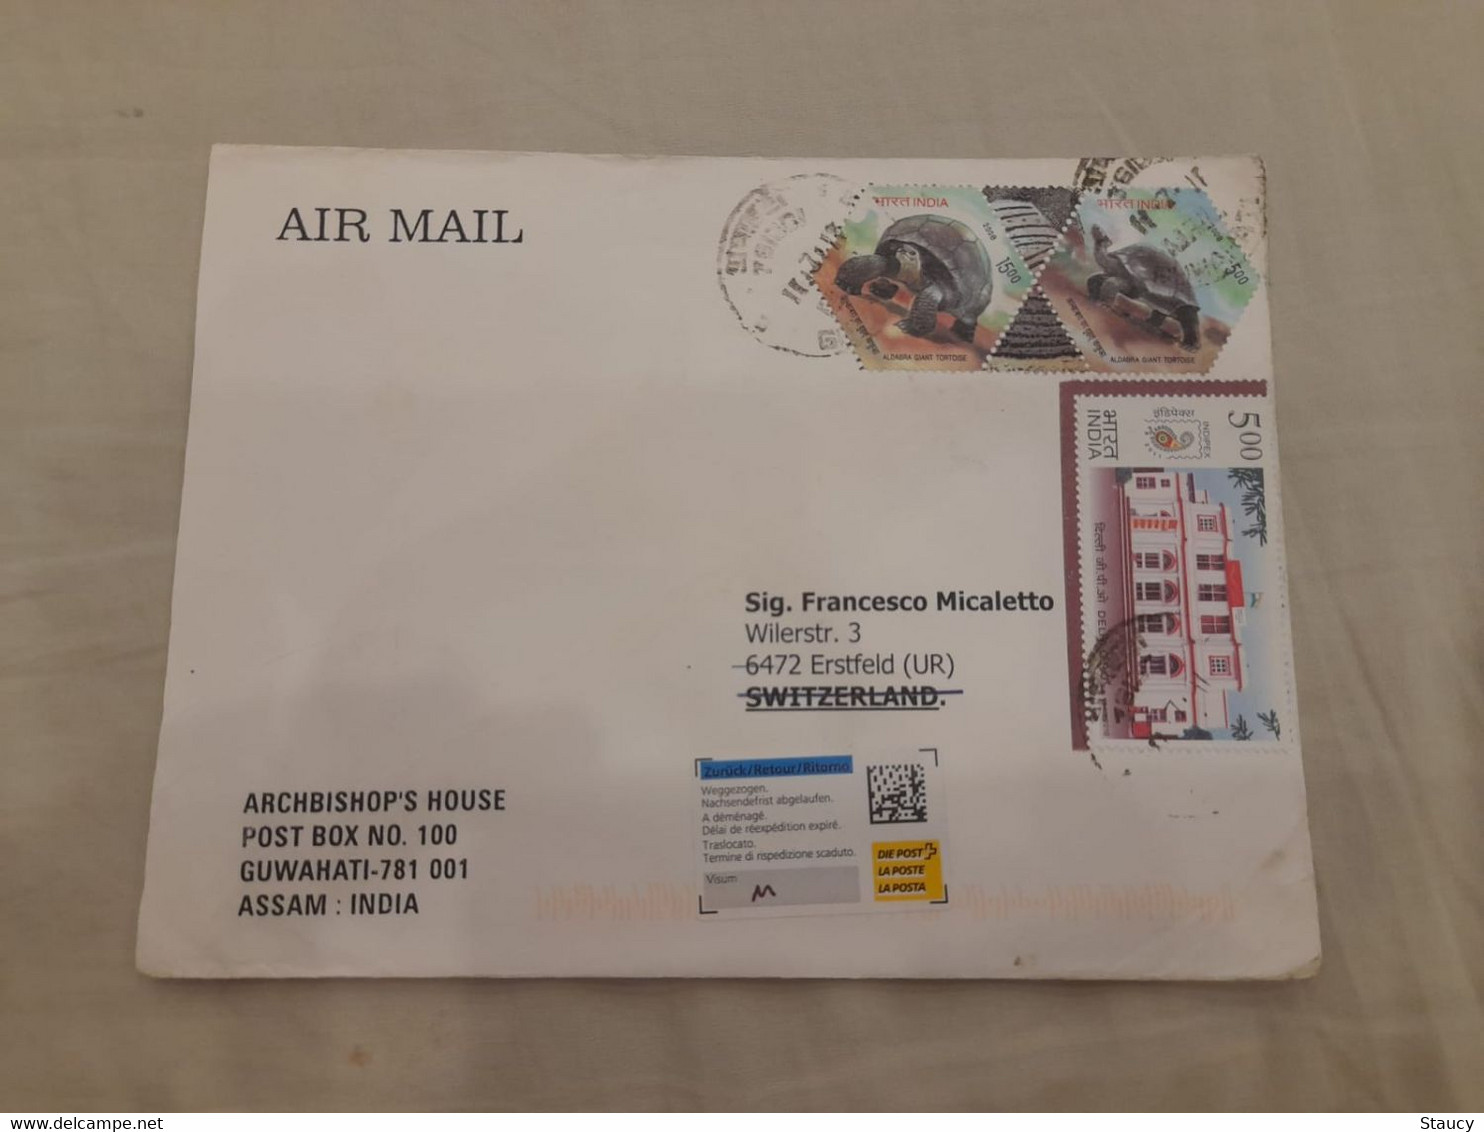 INDIA,2011,RETURN TO SENDER LABEL,AIR MAIL COVER TO SWITZERLAND,3 STAMPS,TORTOISE,POSTAL HERITAGE, GUWAHATI - Poste Aérienne